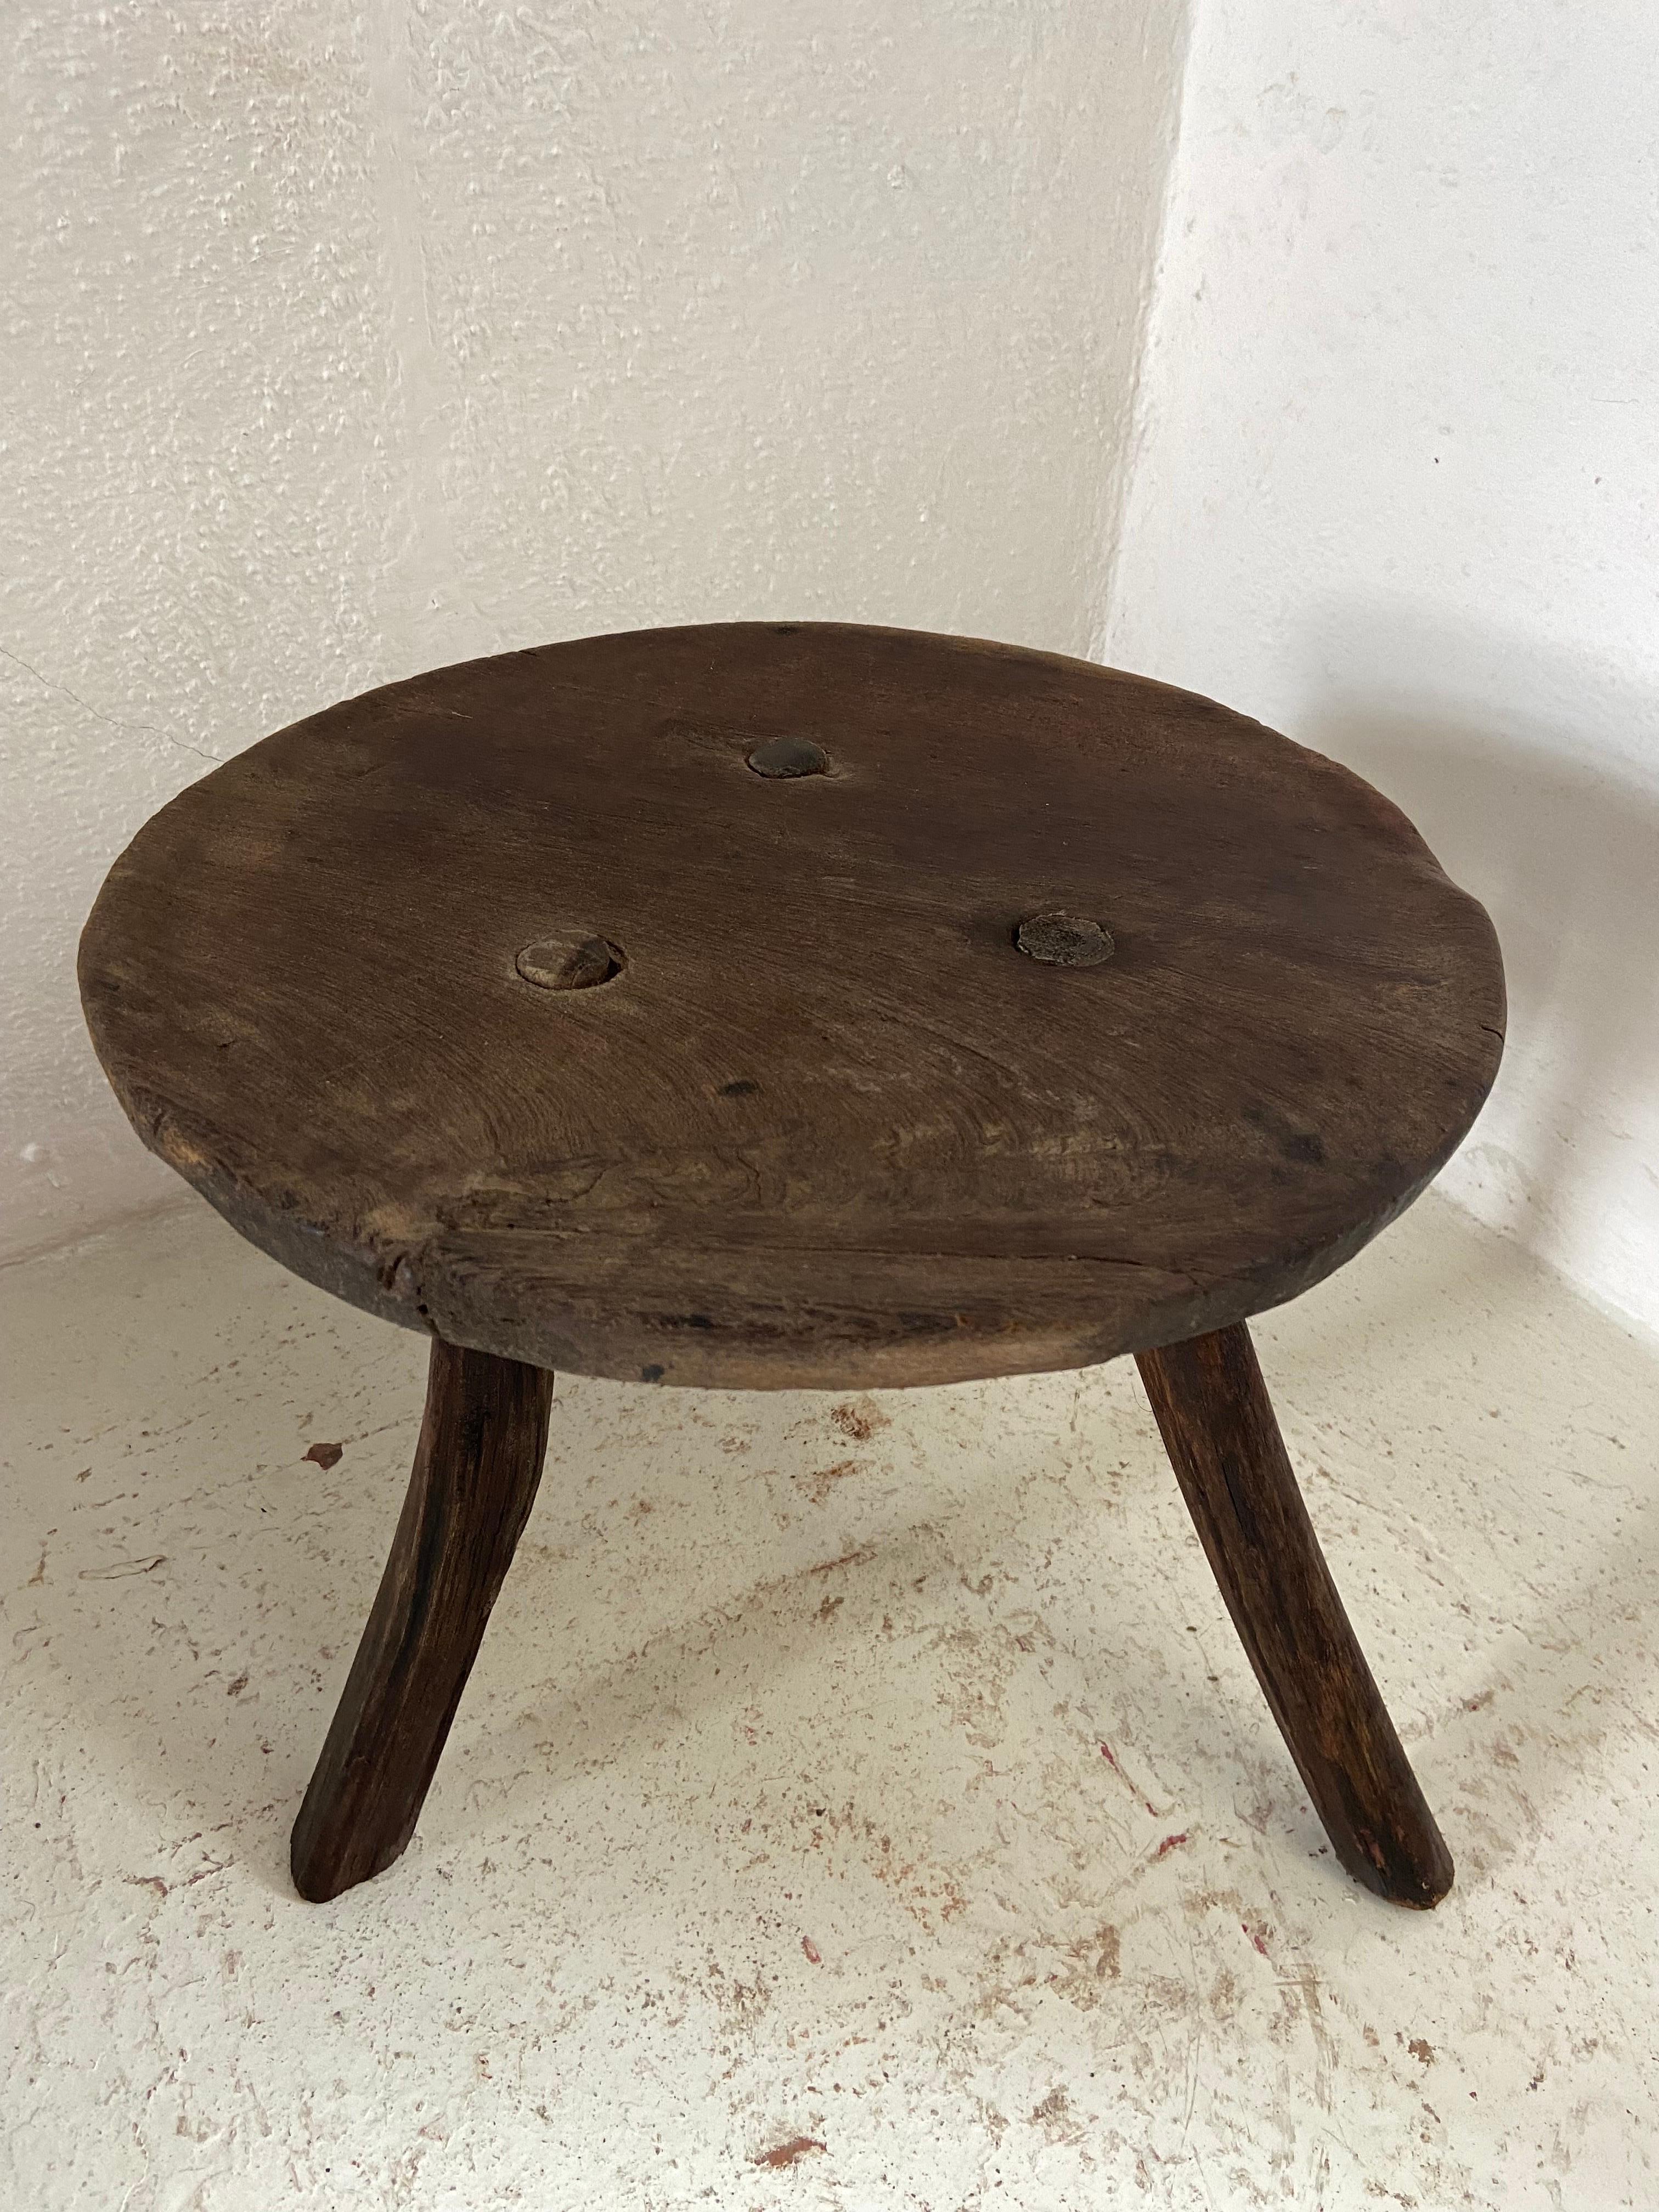 Hand-Crafted Mid-20th Century Hardwood Stool from Mexico